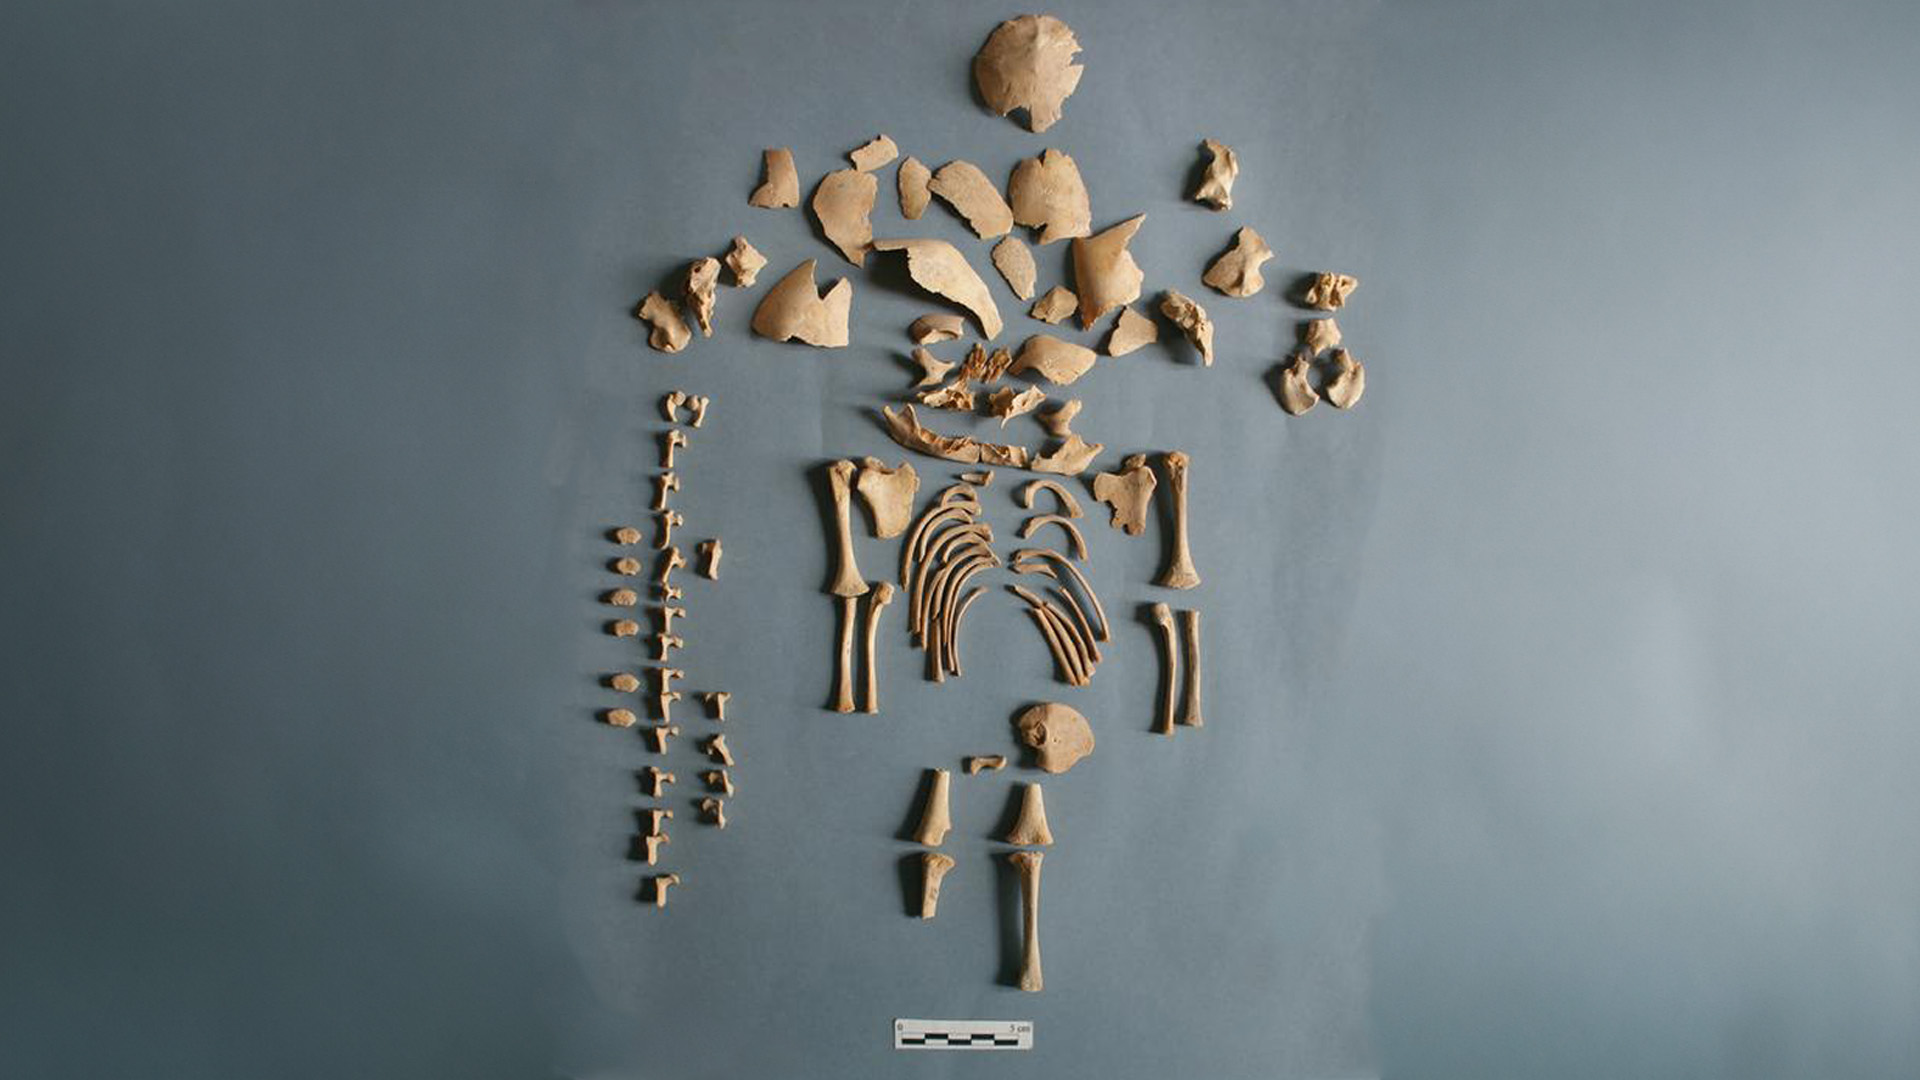 Down's syndrome skeletal remains